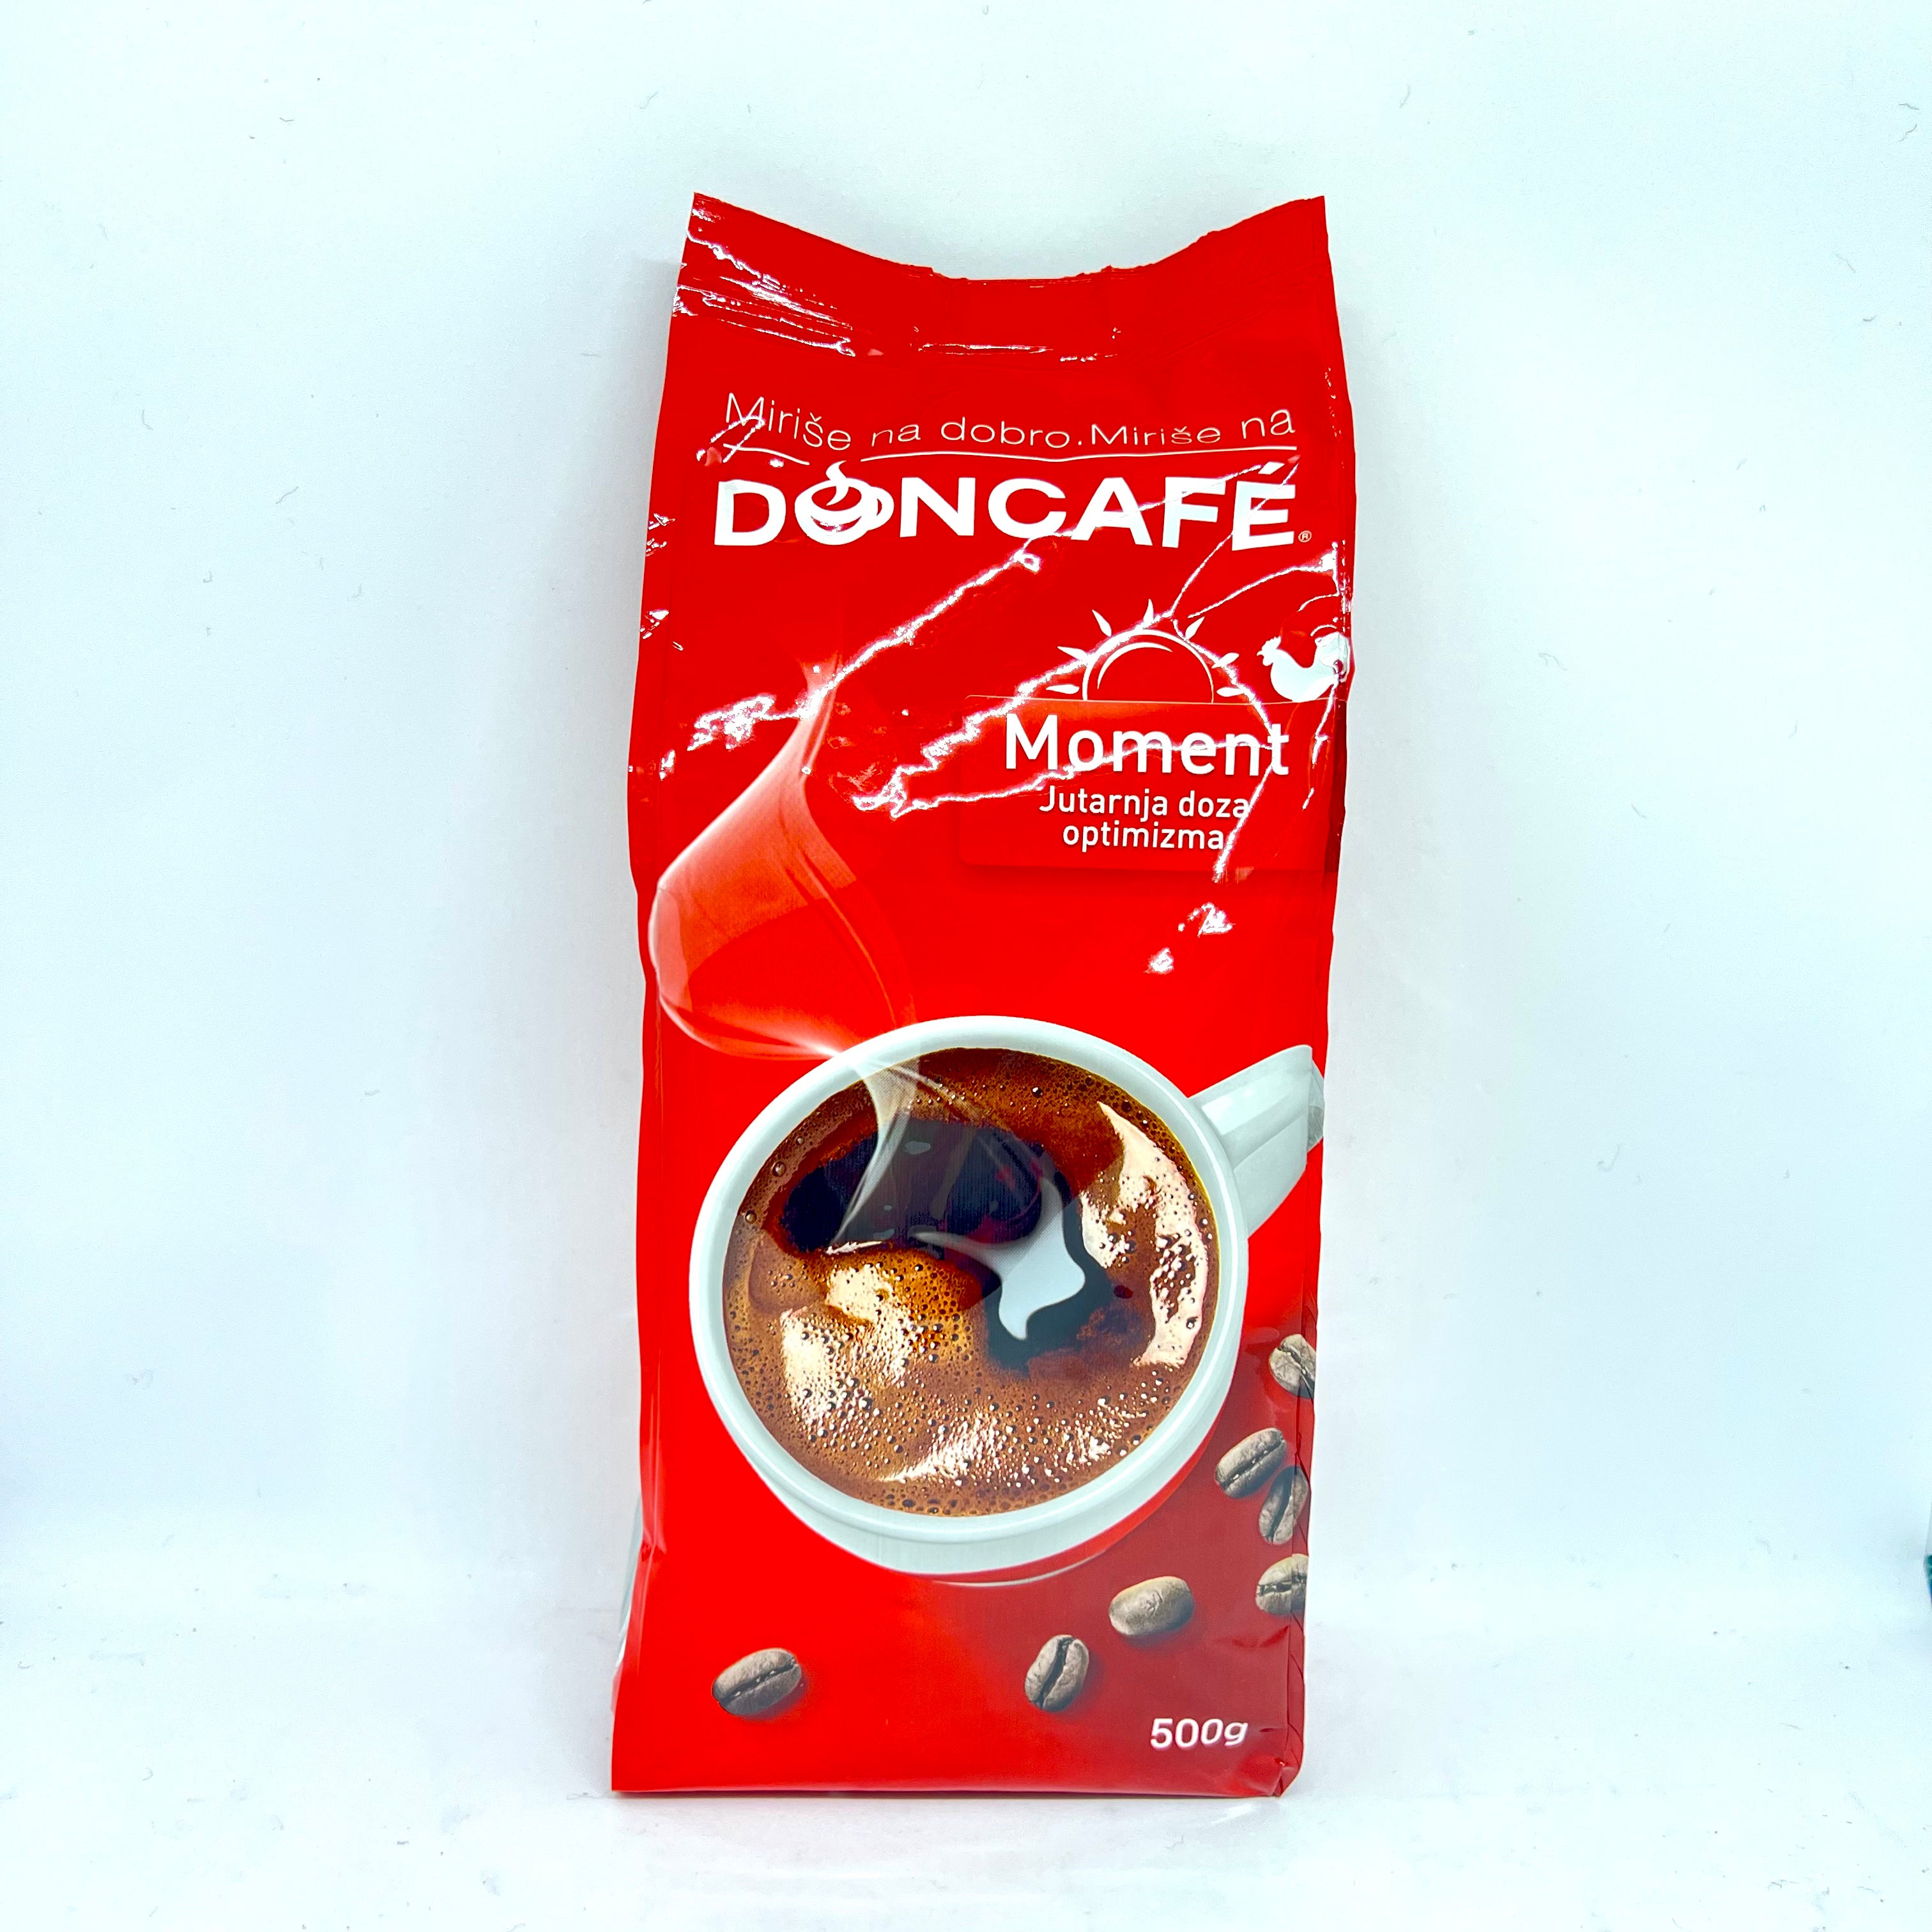 DONCAFE Moment Coffee 500g